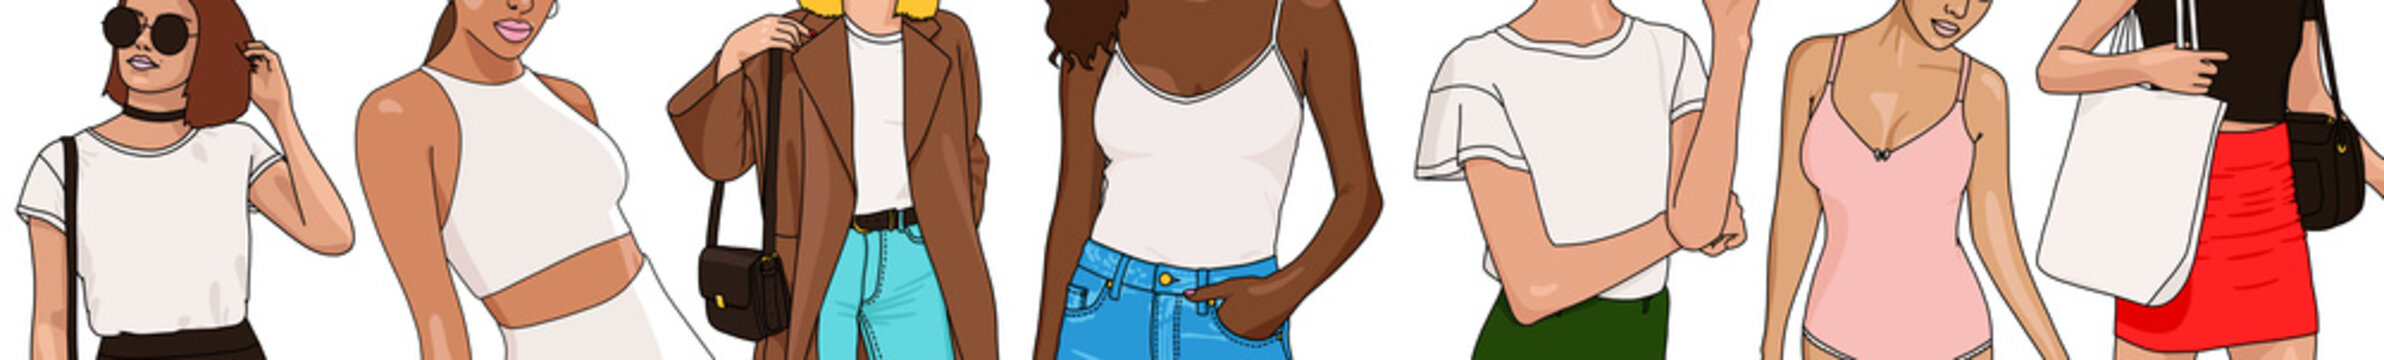 Illustration of diversity of women wearing different clothes with a variety of elements and skin colorsv